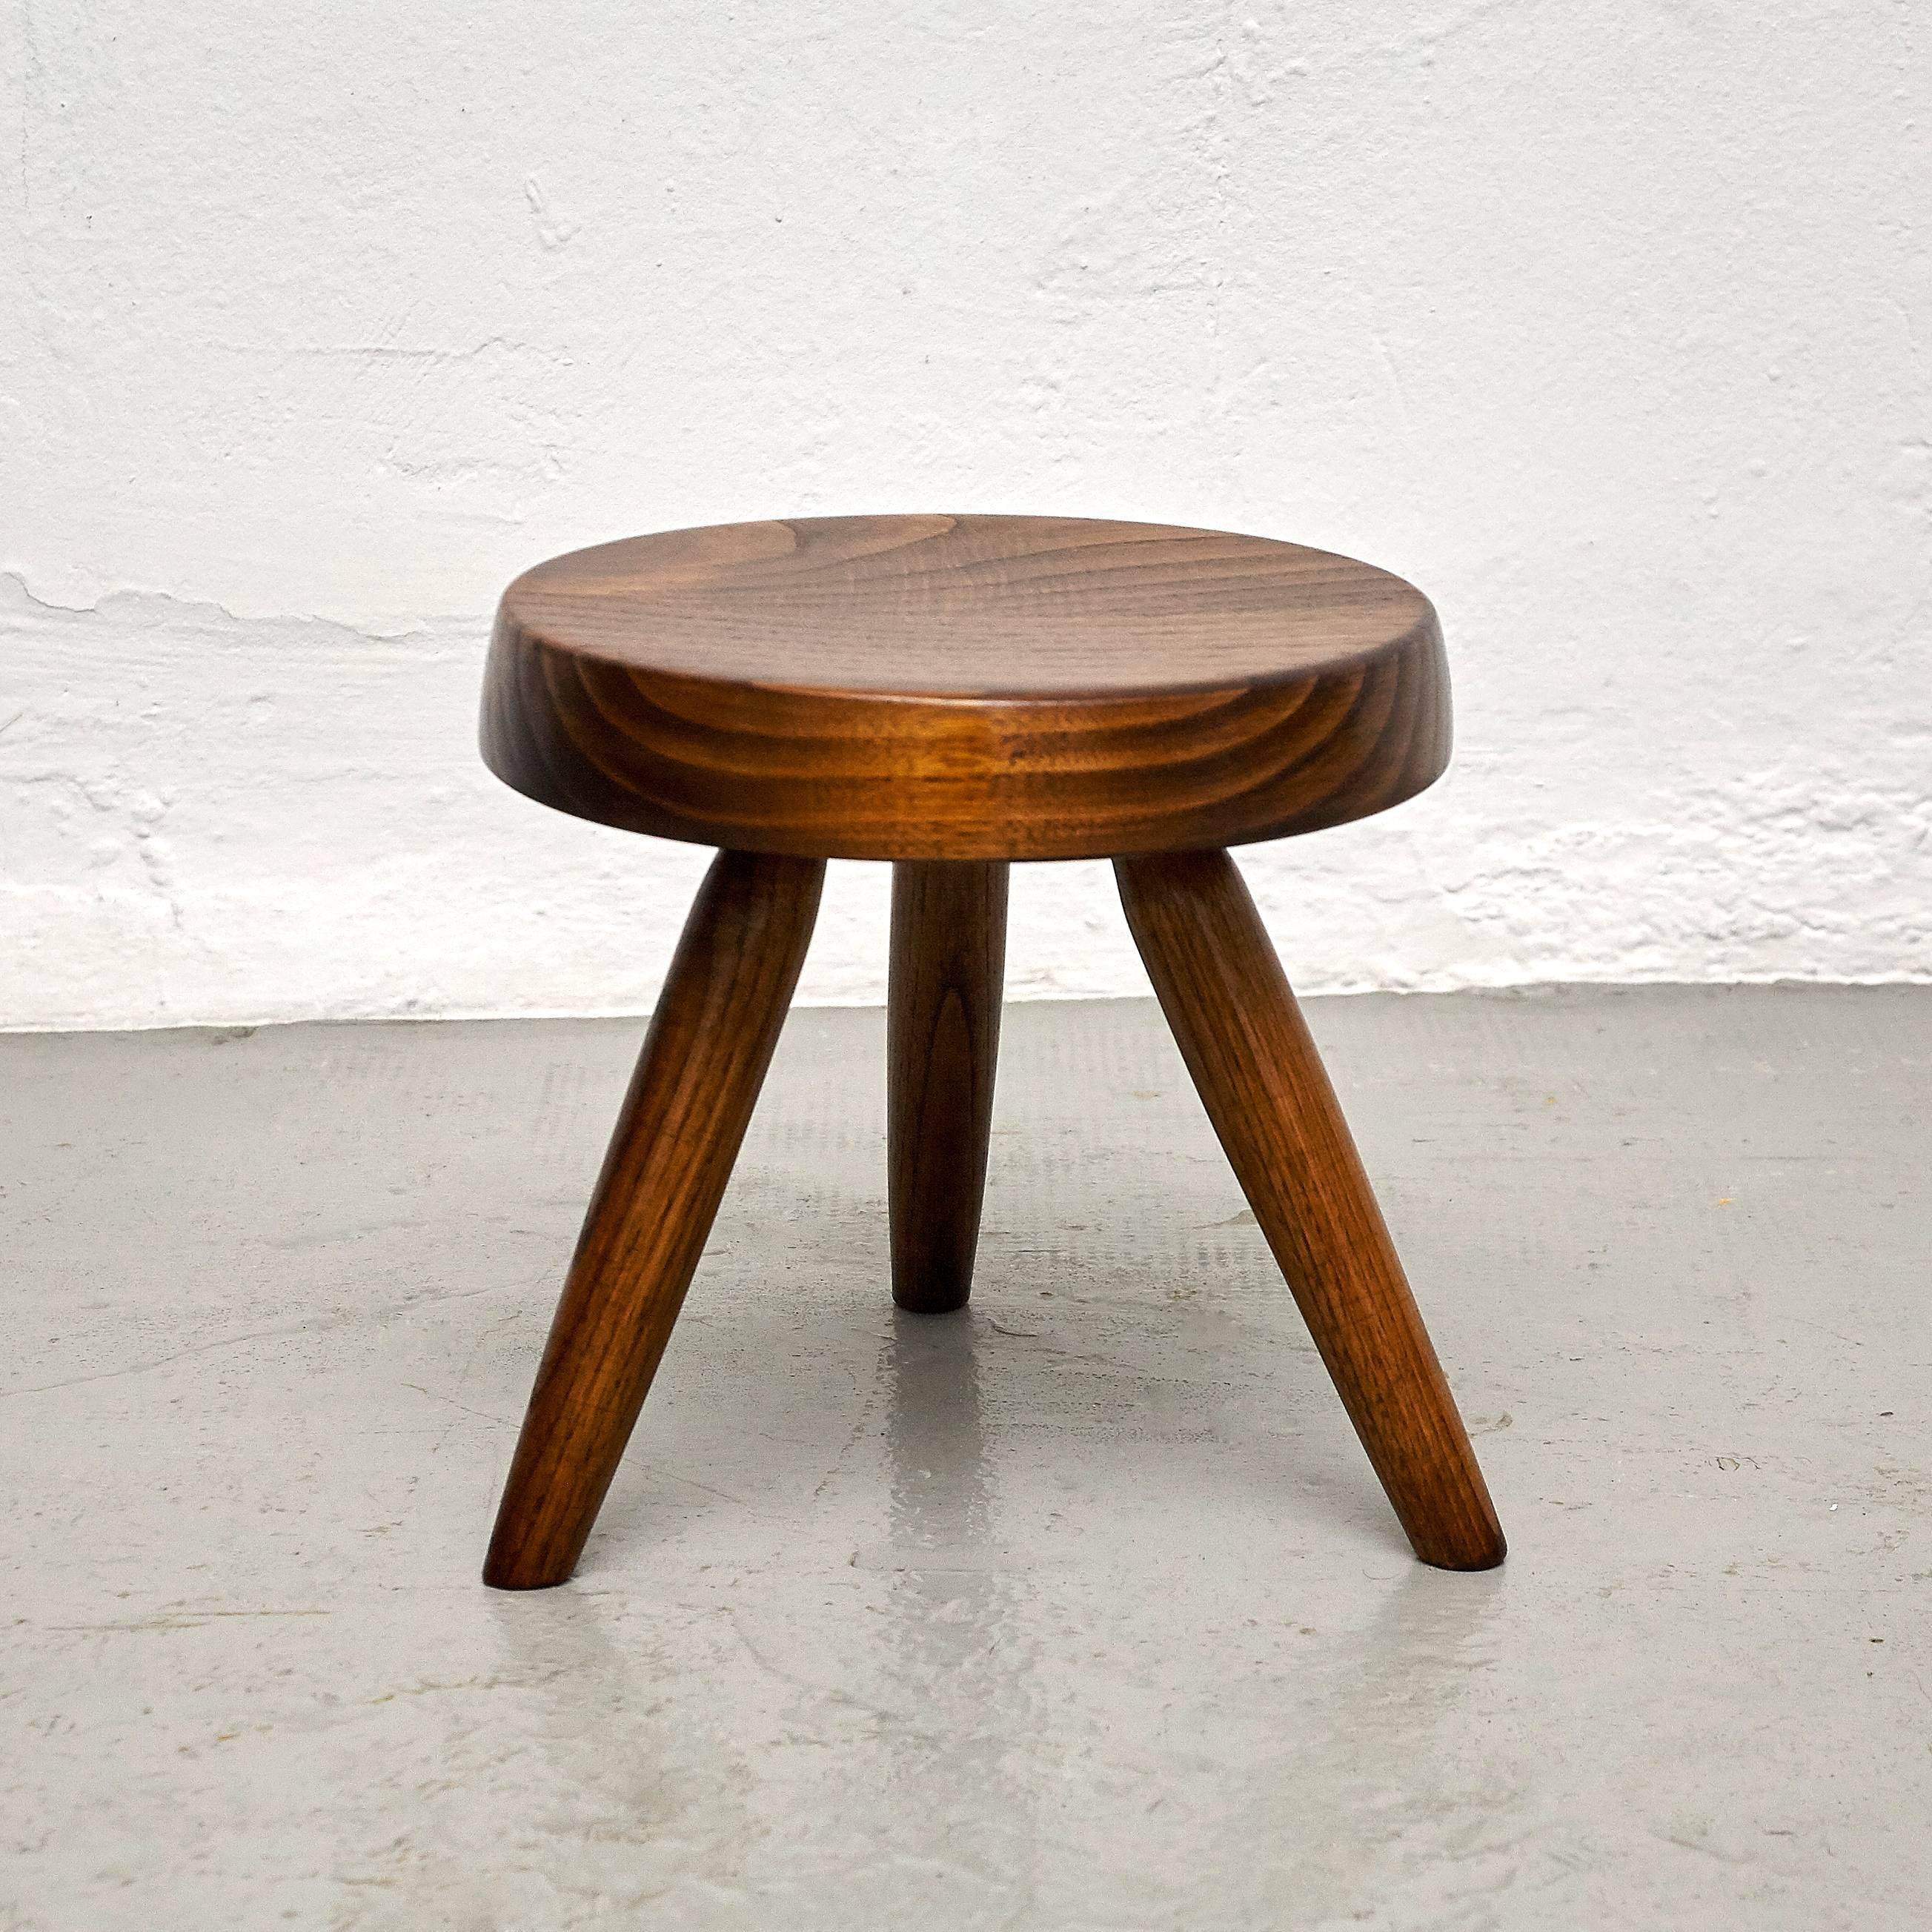 Stool designed in the style of Charlotte Perriand, made by unknown manufacturer.

In good original condition, preserving a beautiful patina, with minor wear consistent with age and use. 

Charlotte Perriand (1903-1999) She was born in Paris in